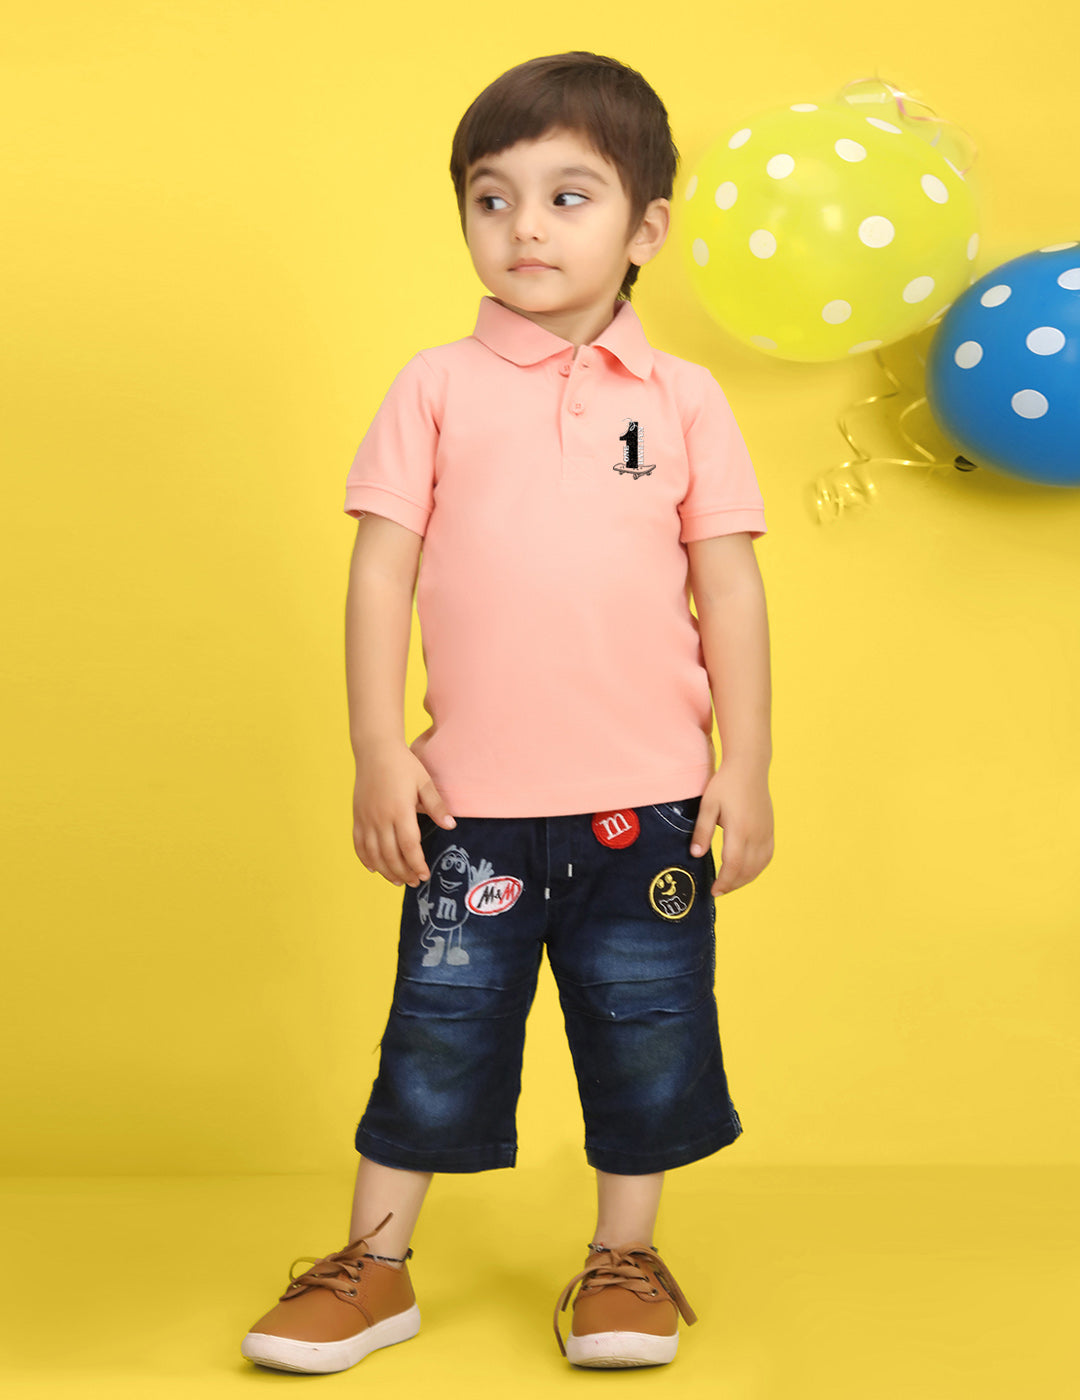 Nusyl Number One Printed Peach Infants Polo T-shirt